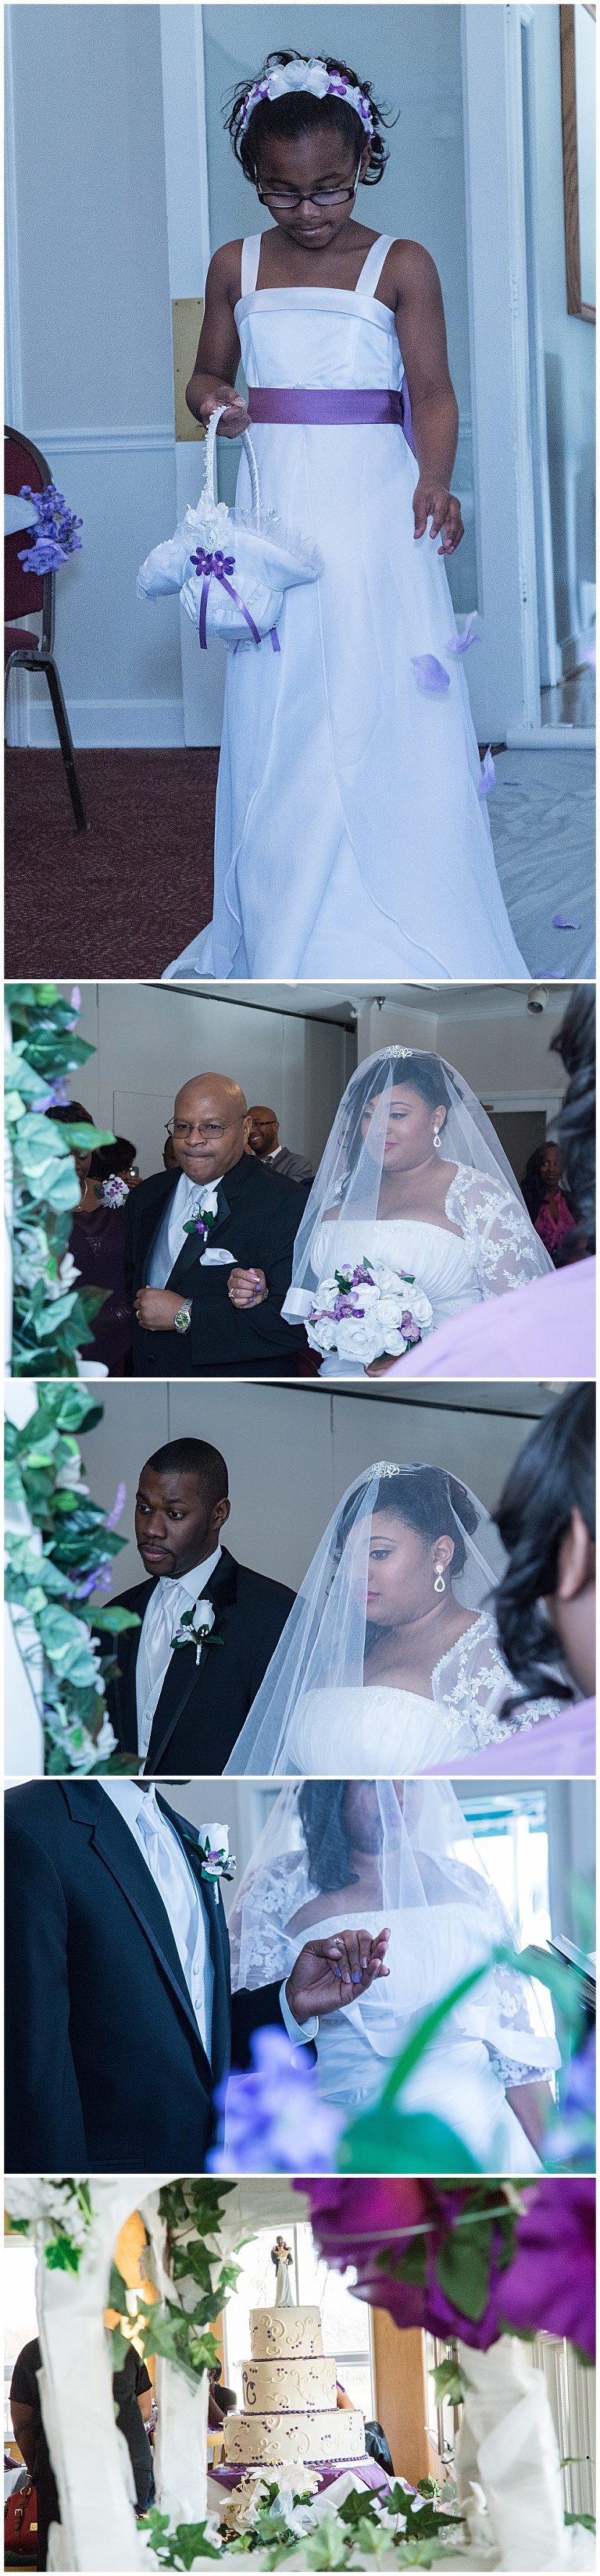 Alisa & Chris' New Years Eve Wedding! | Patuxent Greens Country Club, Laurel Maryland 2013-12-31_0008